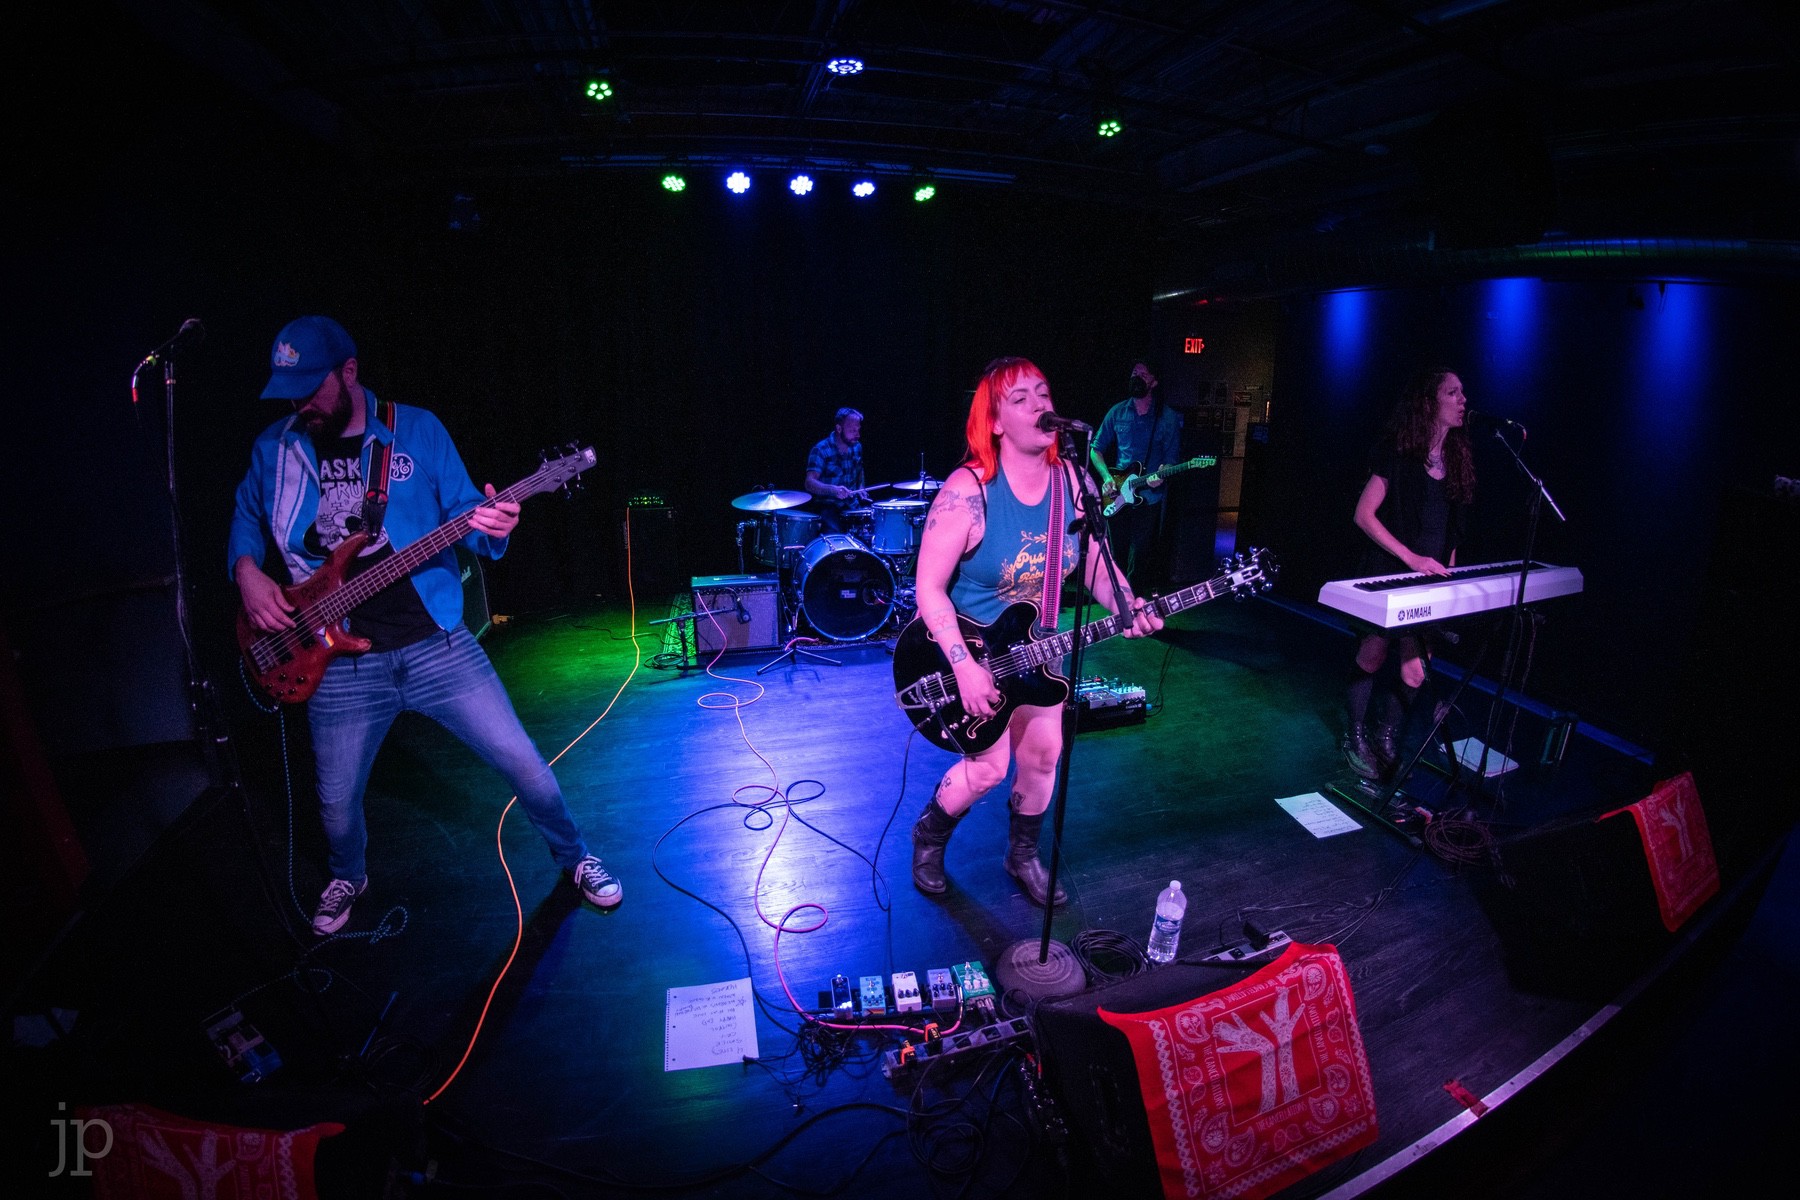 The Cancellations, a rock band, plays a song on a large stage. There is a bassist, a guitarist and vocalist with orange hair, and a keyboard player. The stage is lit in shades of blue and purple.